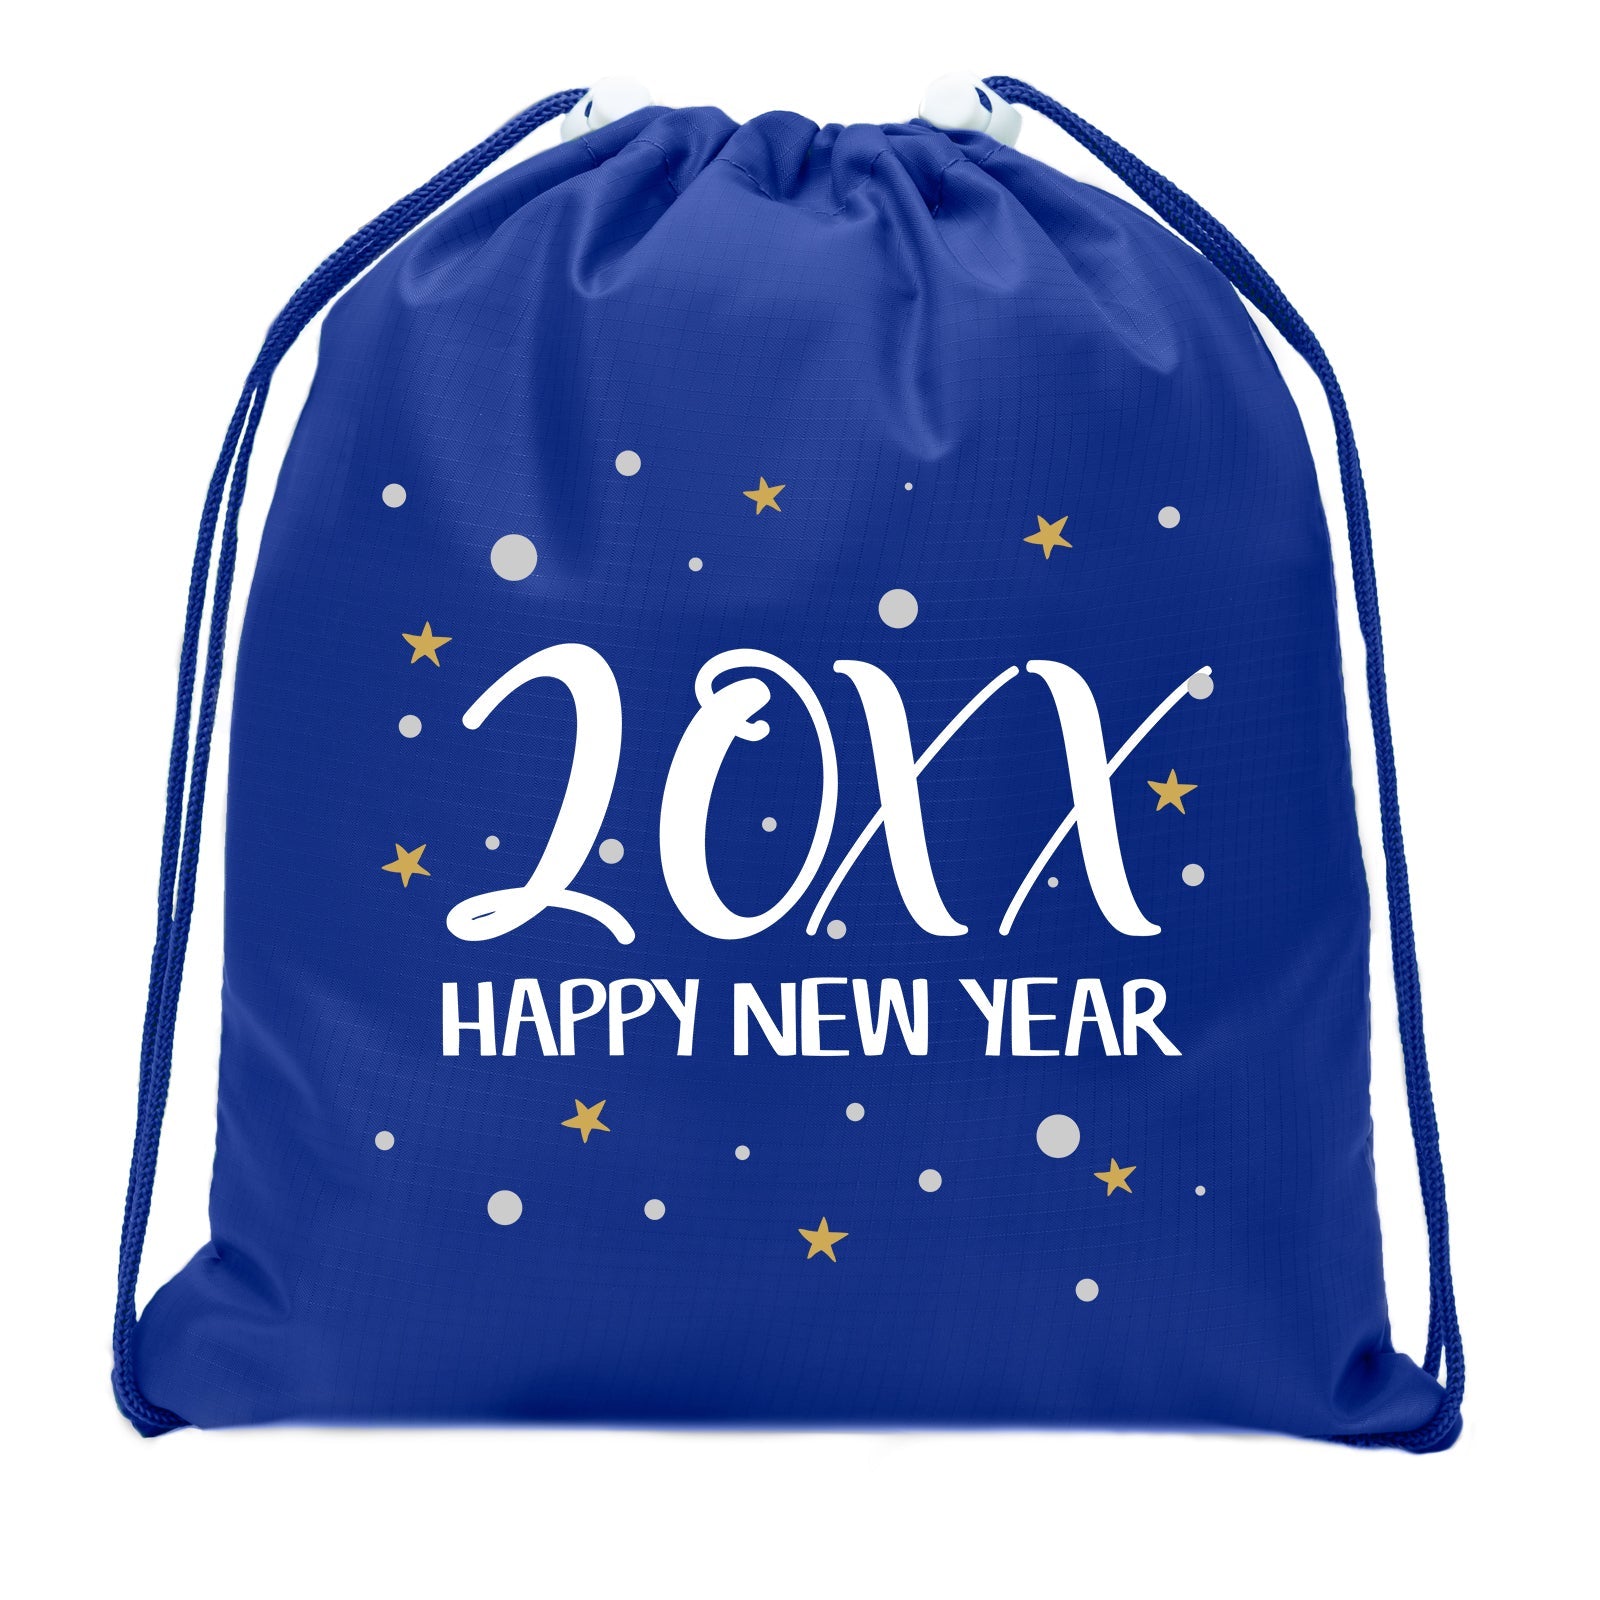 Accessory - New Year’s Eve Party Goody Bags, Table Top New Years Decorations, 2019 Gift Bags - 2019 Gold Stars